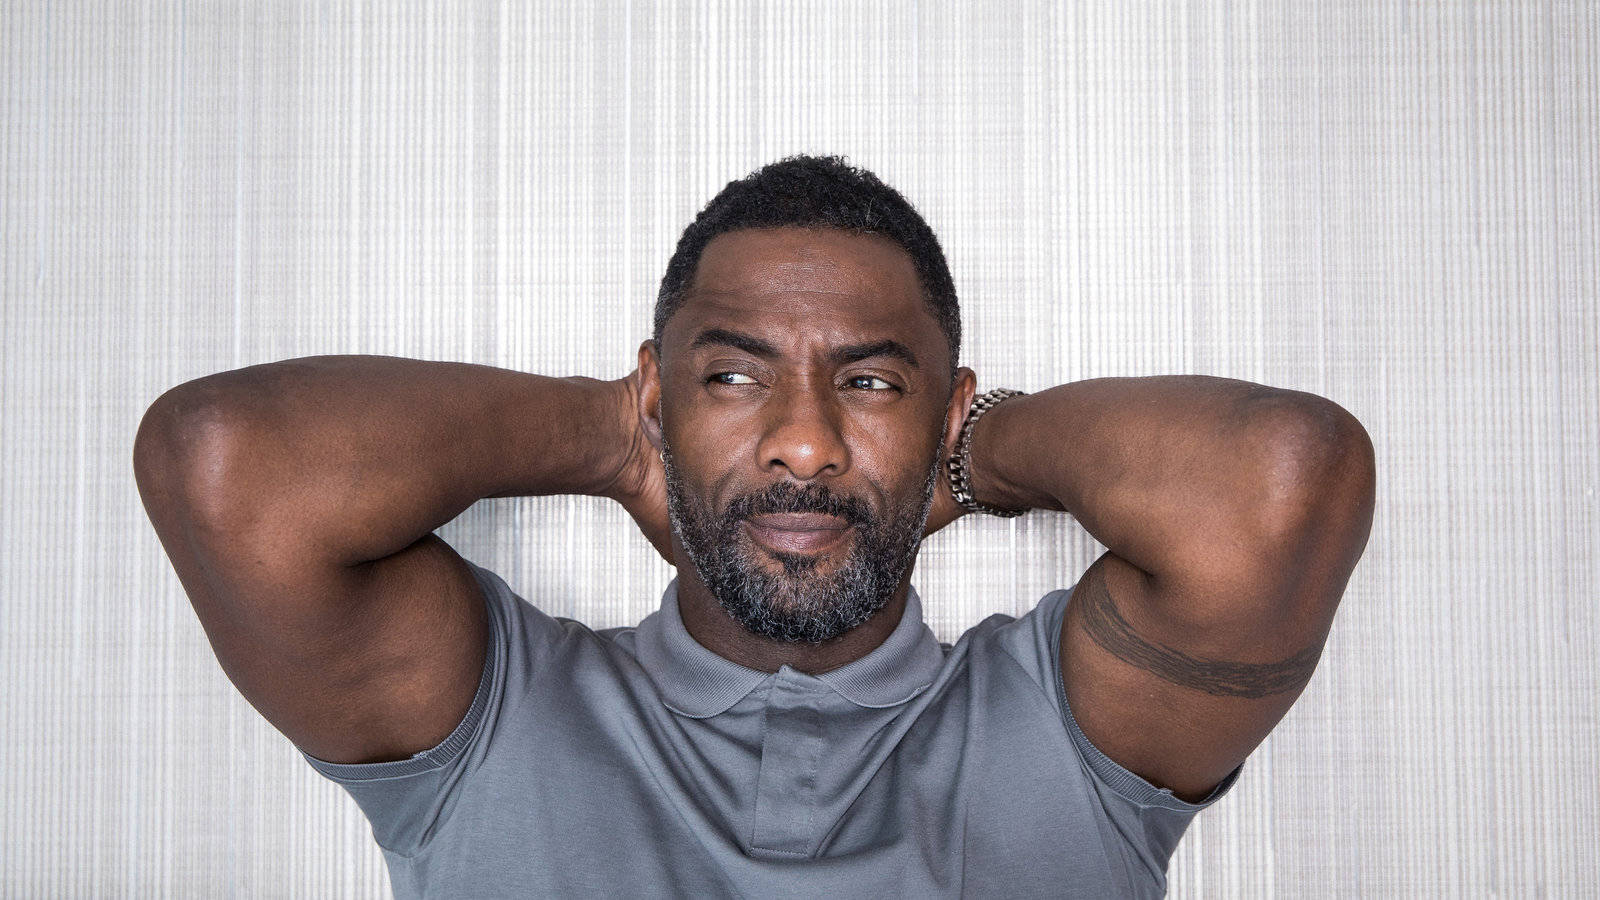 "Idris Elba lounging with hands on back of head" Wallpaper